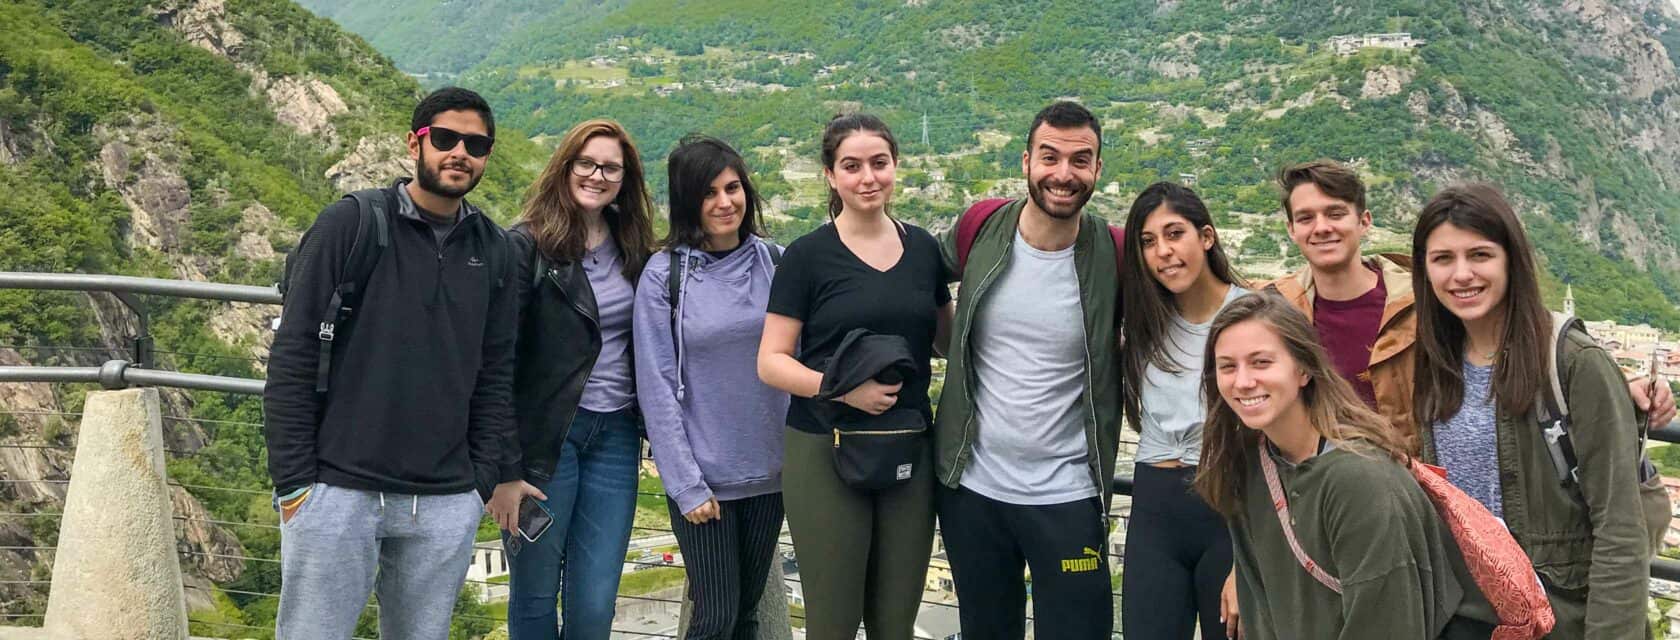 Atlantis students hiking in the mountains.